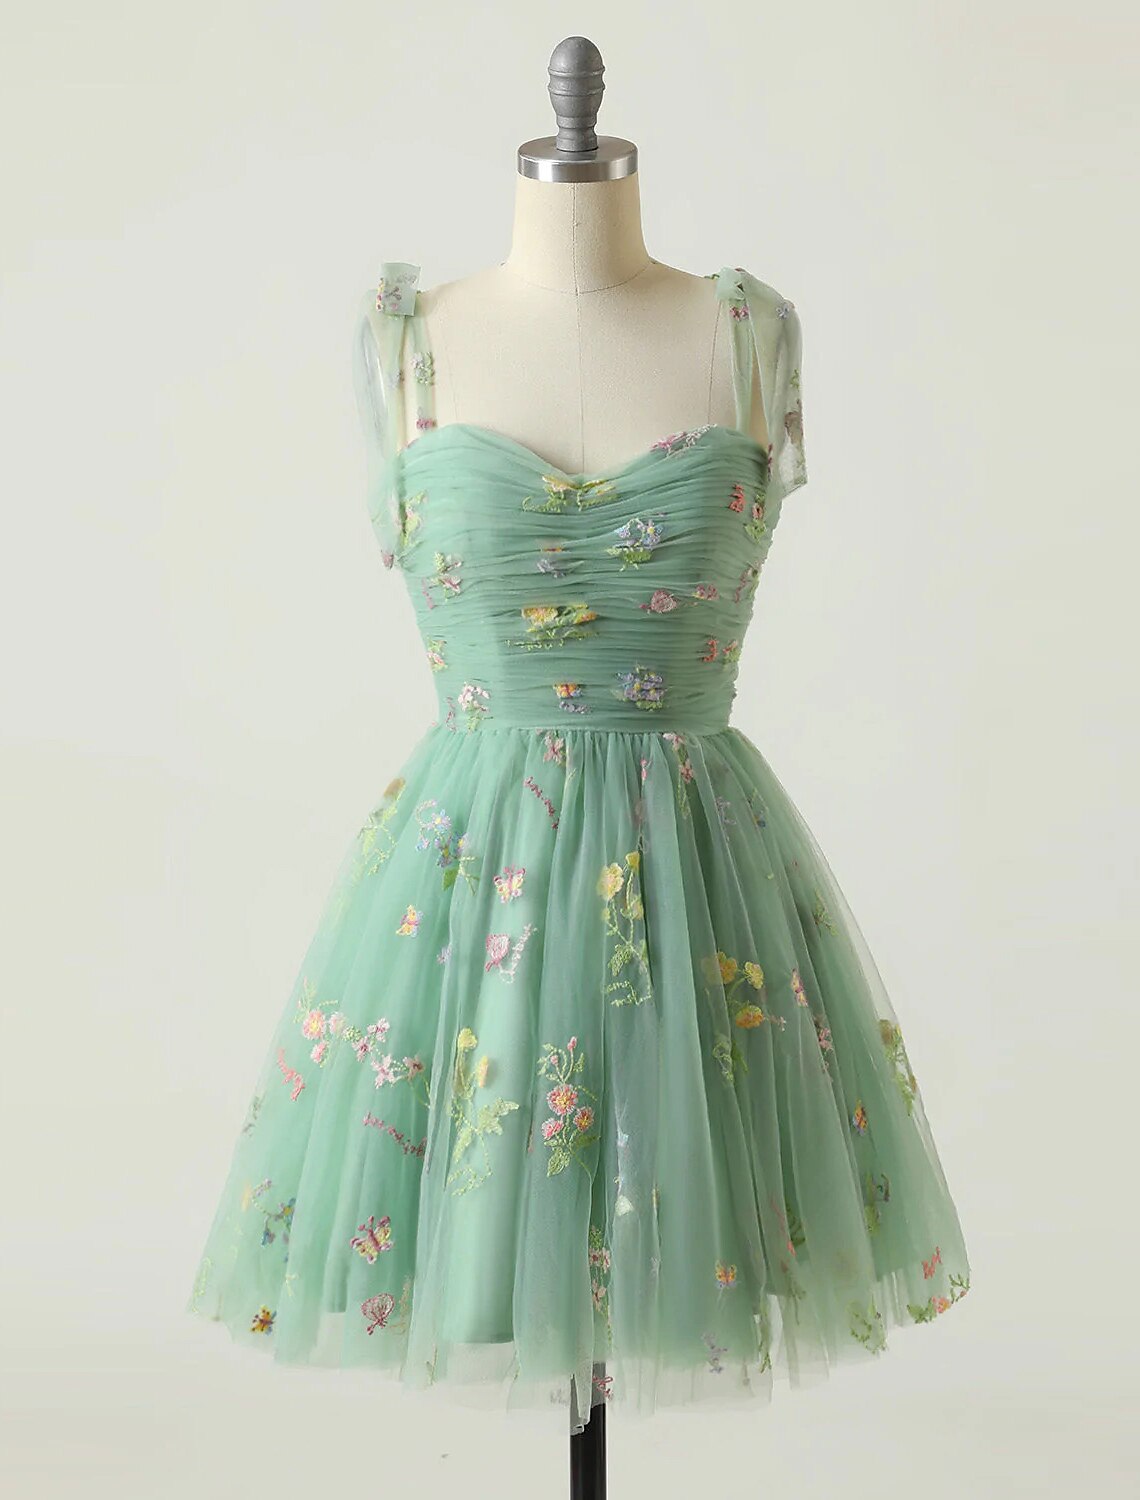 A-Line Homecoming Dresses Floral Dress Party Wear Summer Short / Mini Sleeveless Spaghetti Strap Tulle with Embroidery